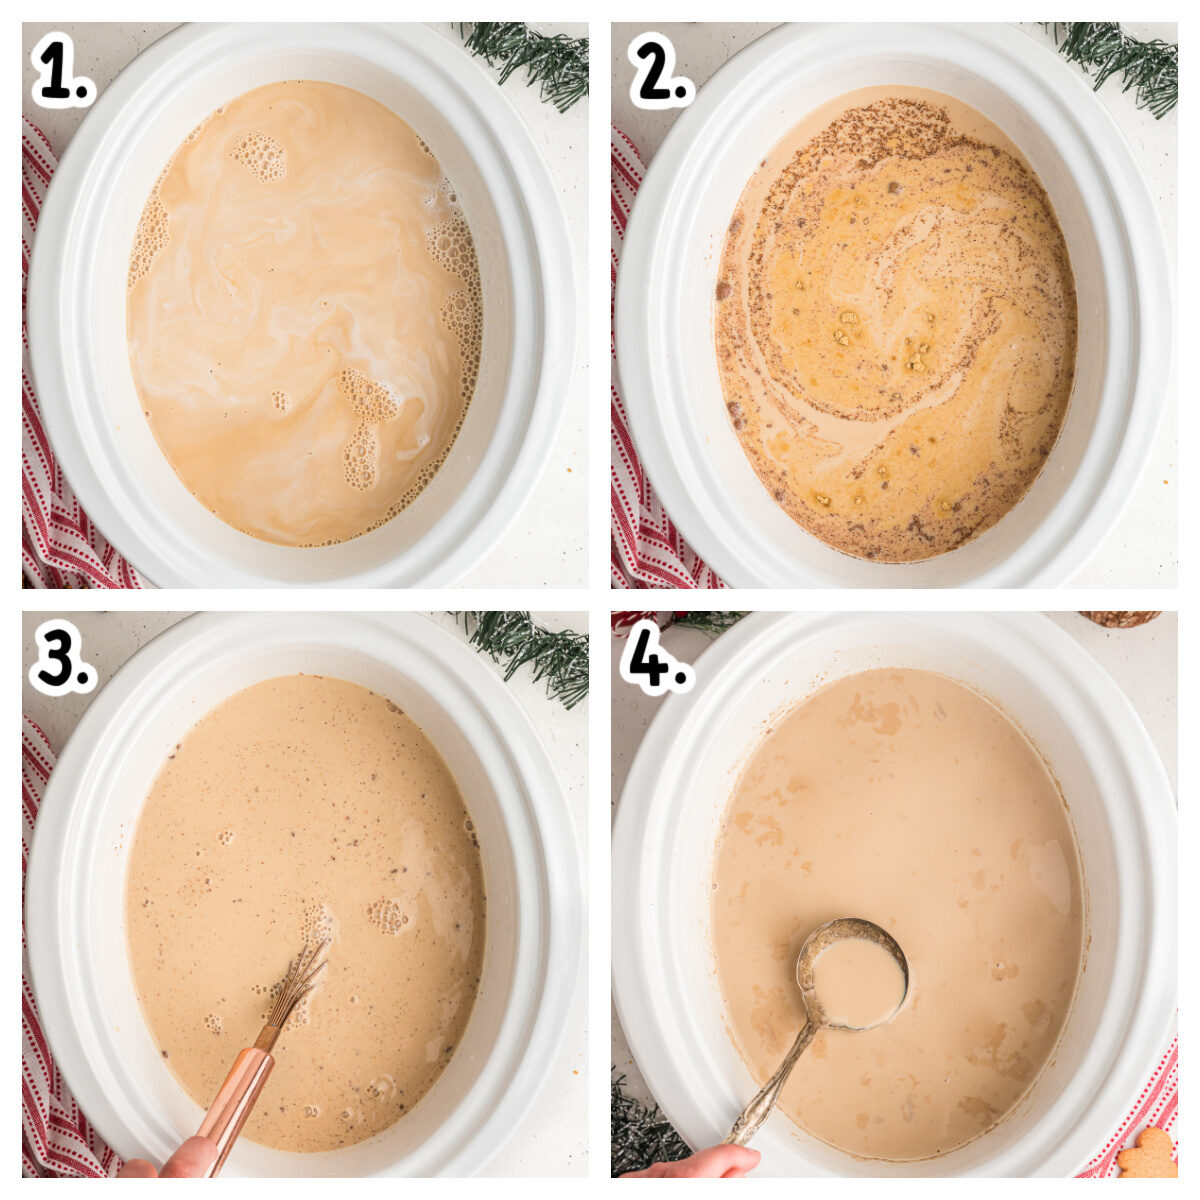 4 images showing how to mix gingerbread lattes in crockpot.